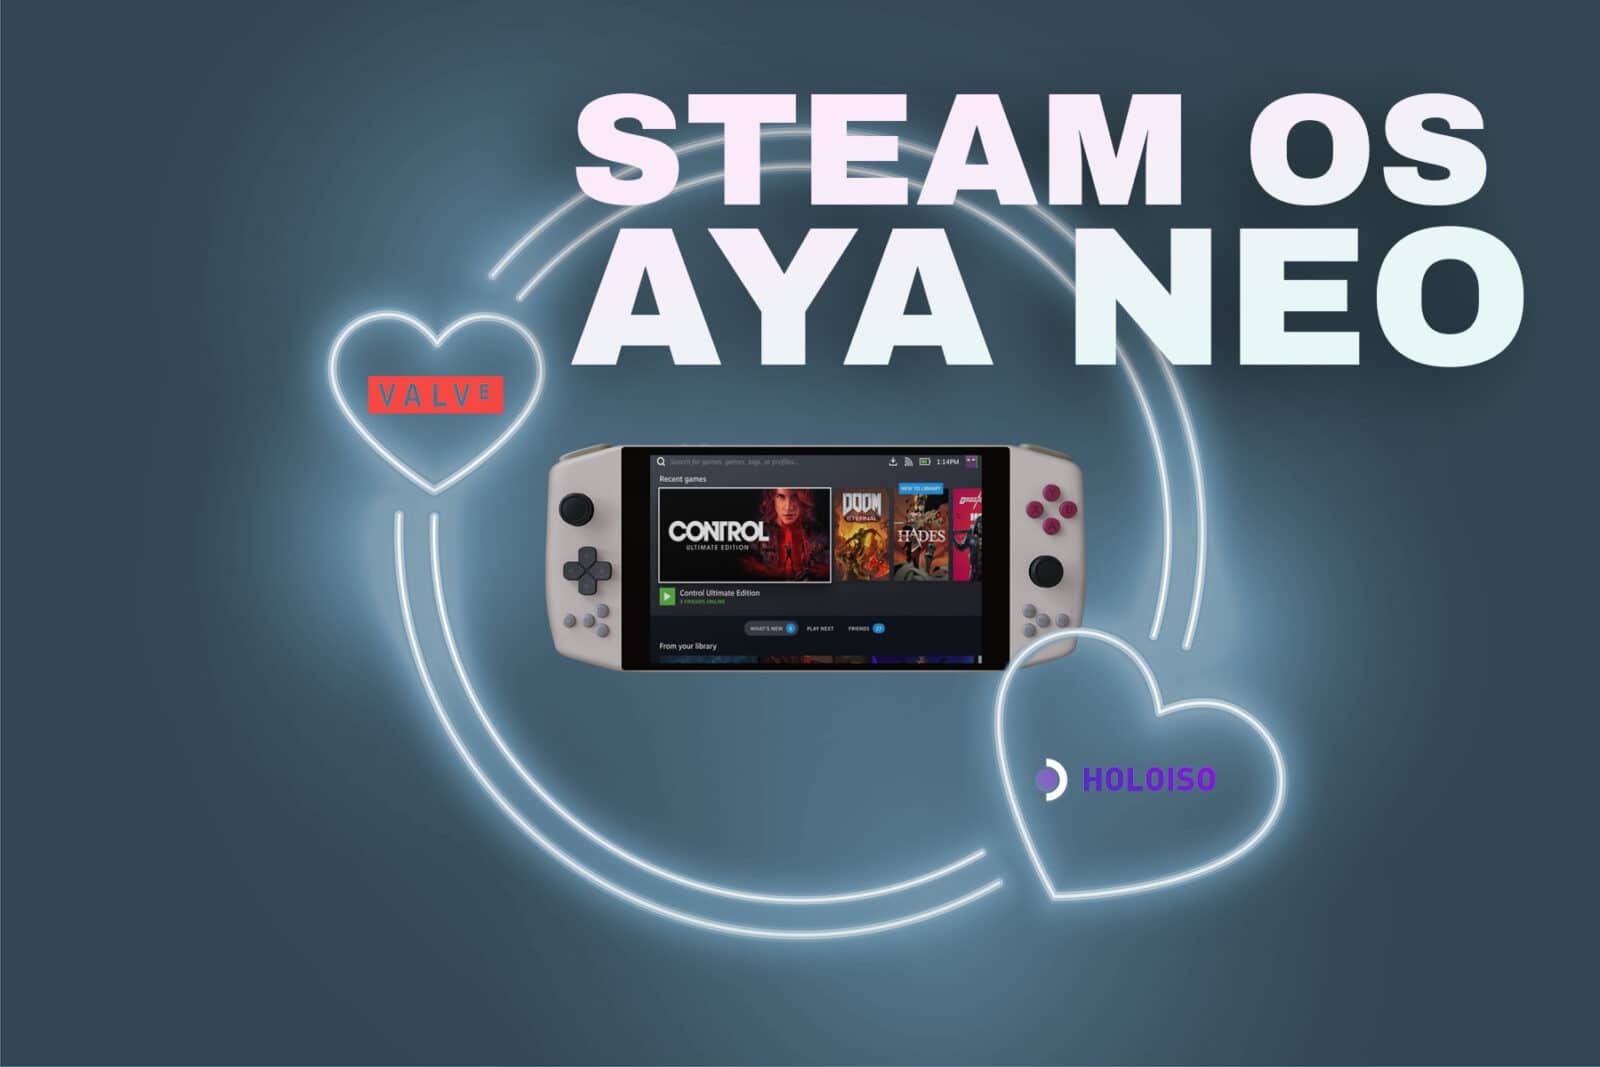 SteamOS on AYANEO